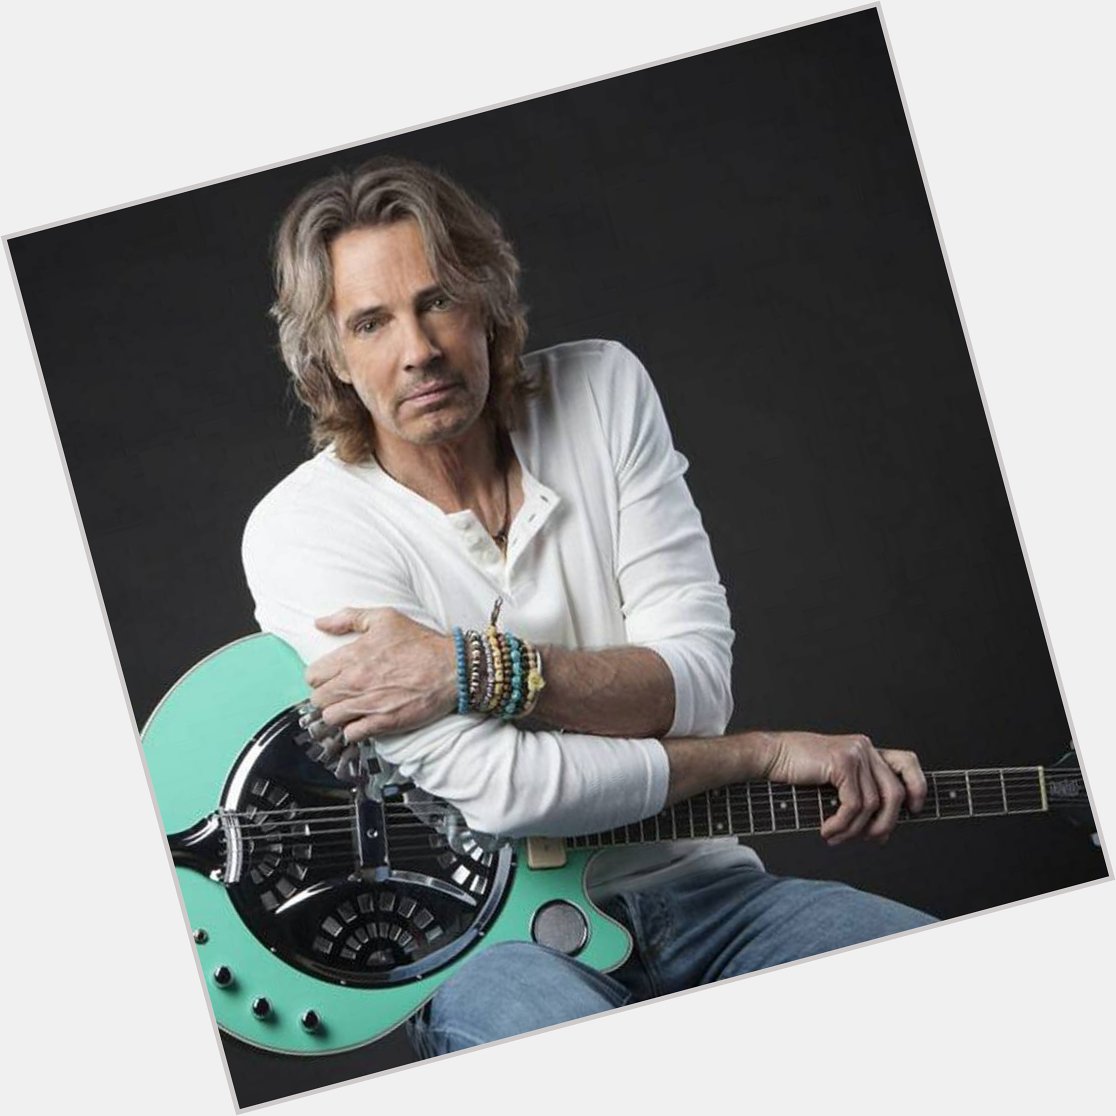 A Big BOSS Happy Birthday today to Rick Springfield from all of us at Boss Boss Radio! 